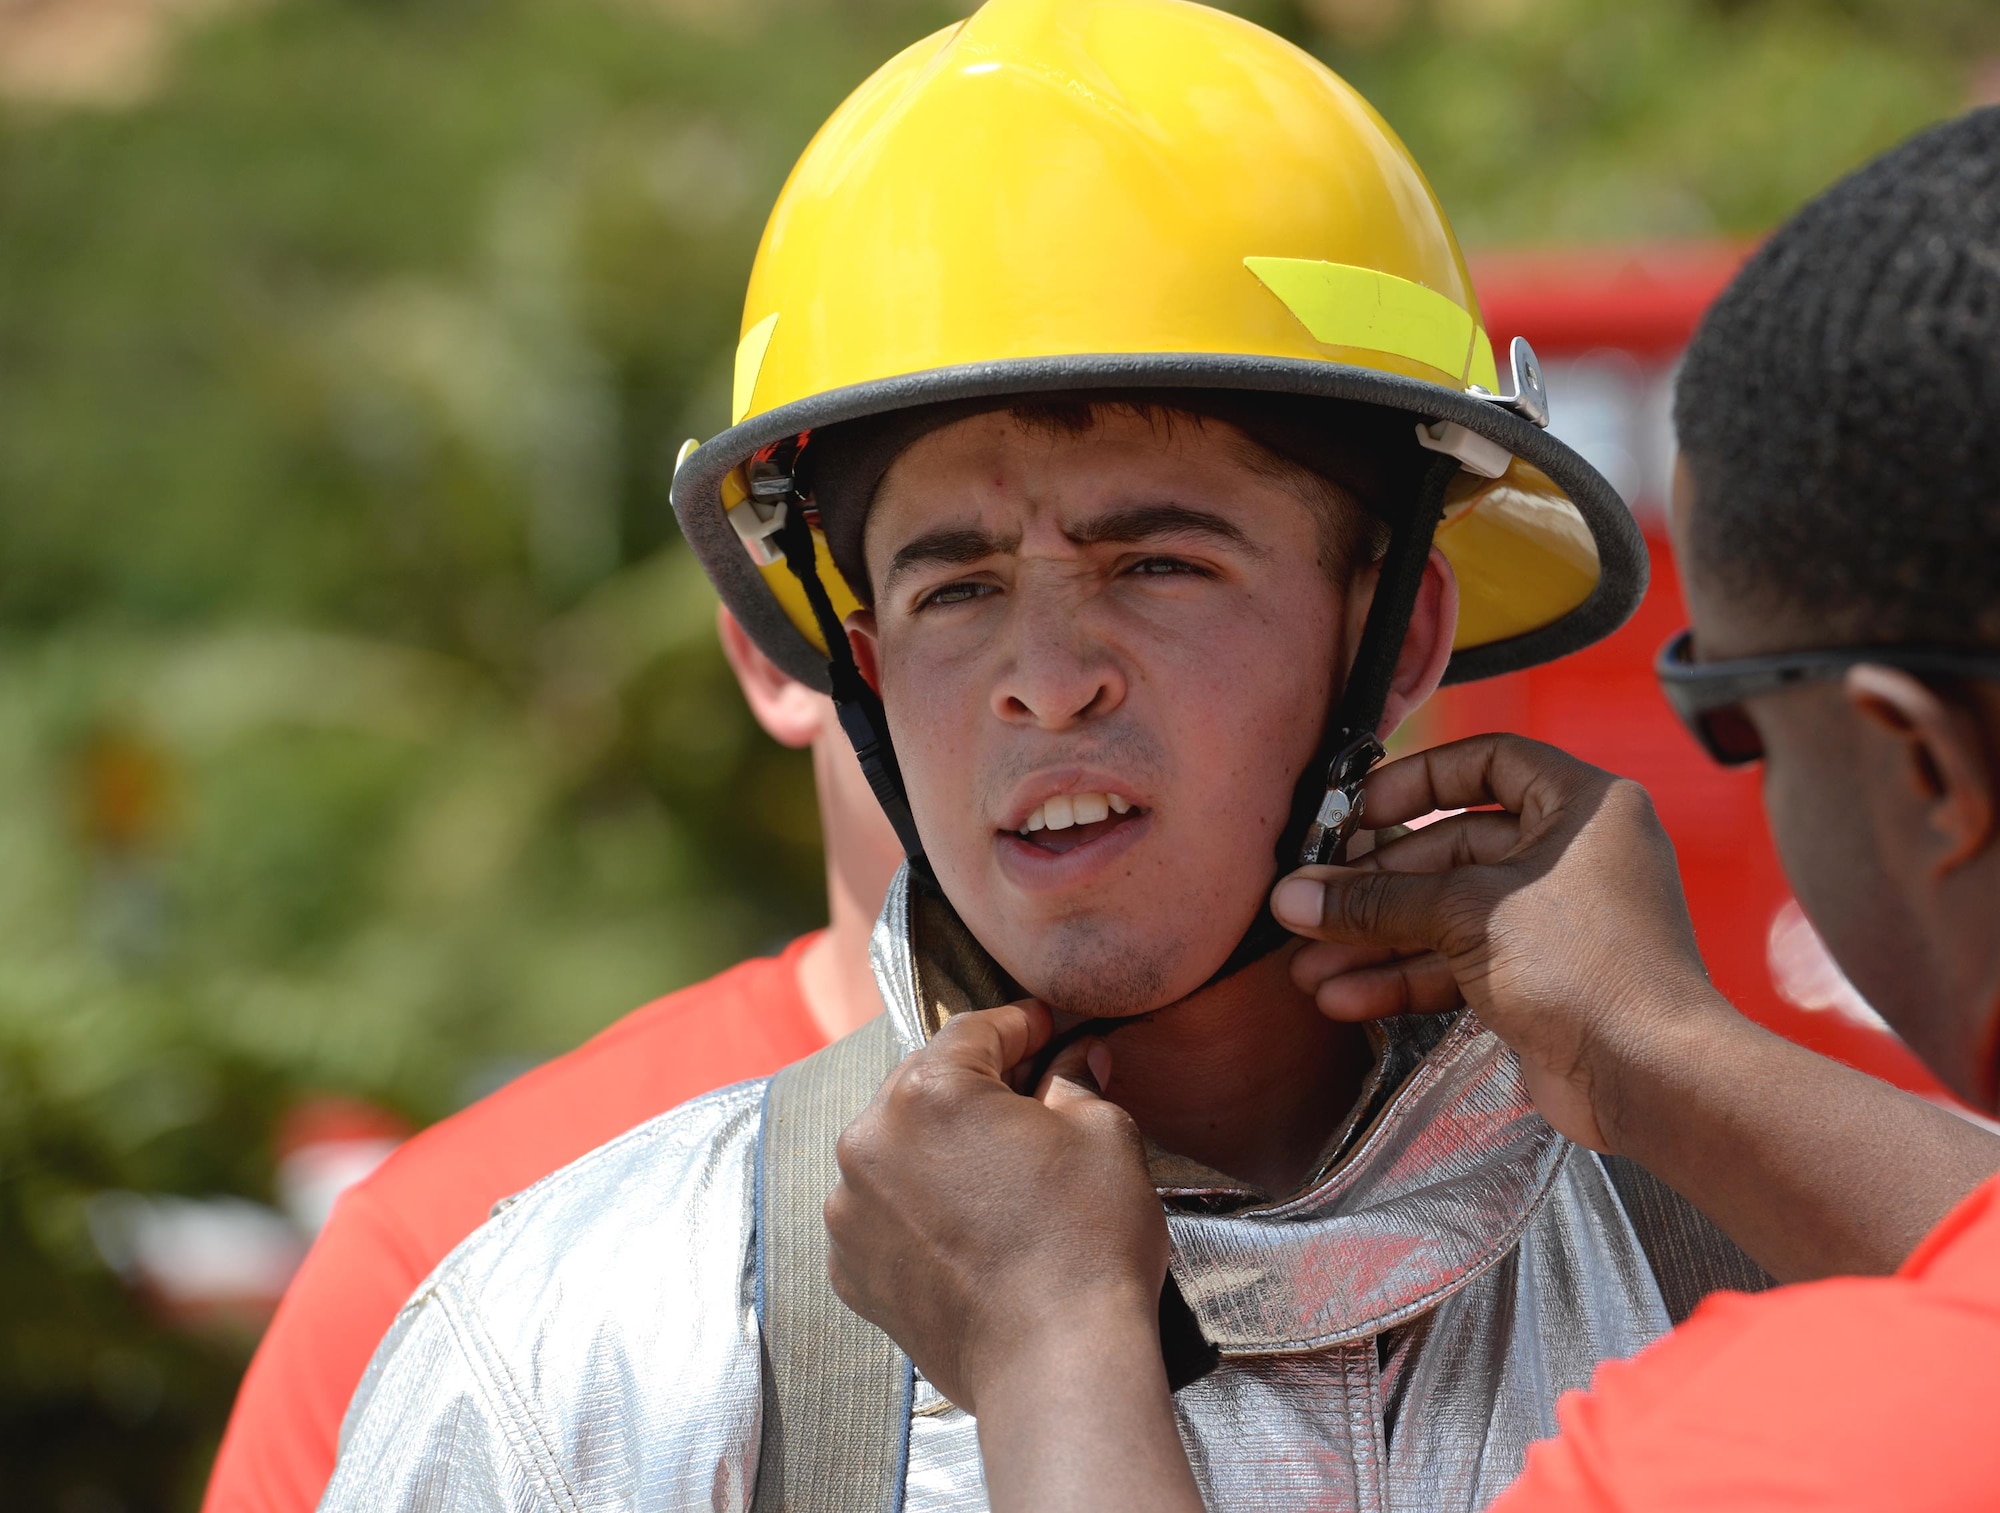 Airman 1st Class Jared May, 36th Civil Engineer Squadron fire protection crew chief, has his helmet fastened to his head during the annual Guam Fire Muster competition March 5, 2016, in Hagåtña, Guam. The fire muster tests a firefighter’s ability to perform basic firefighting techniques to include spraying a target with water, navigating through obstacles, carrying a casualty and using a sledgehammer. (U.S. Air Force photo/Staff Sgt. Benjamin Gonsier)